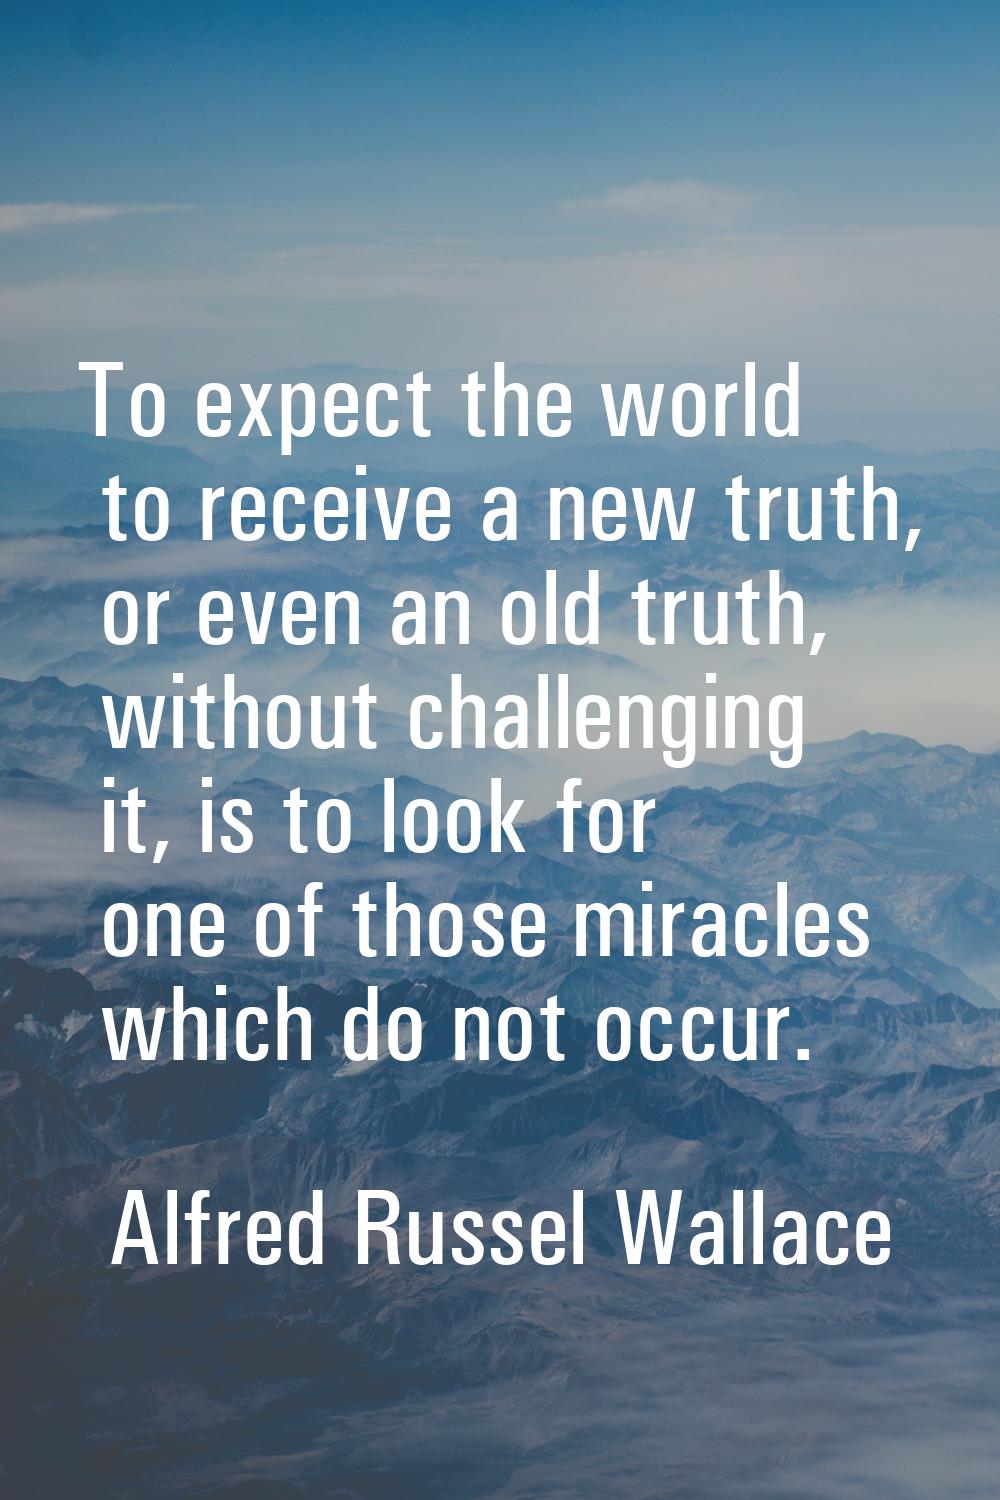 To expect the world to receive a new truth, or even an old truth, without challenging it, is to loo